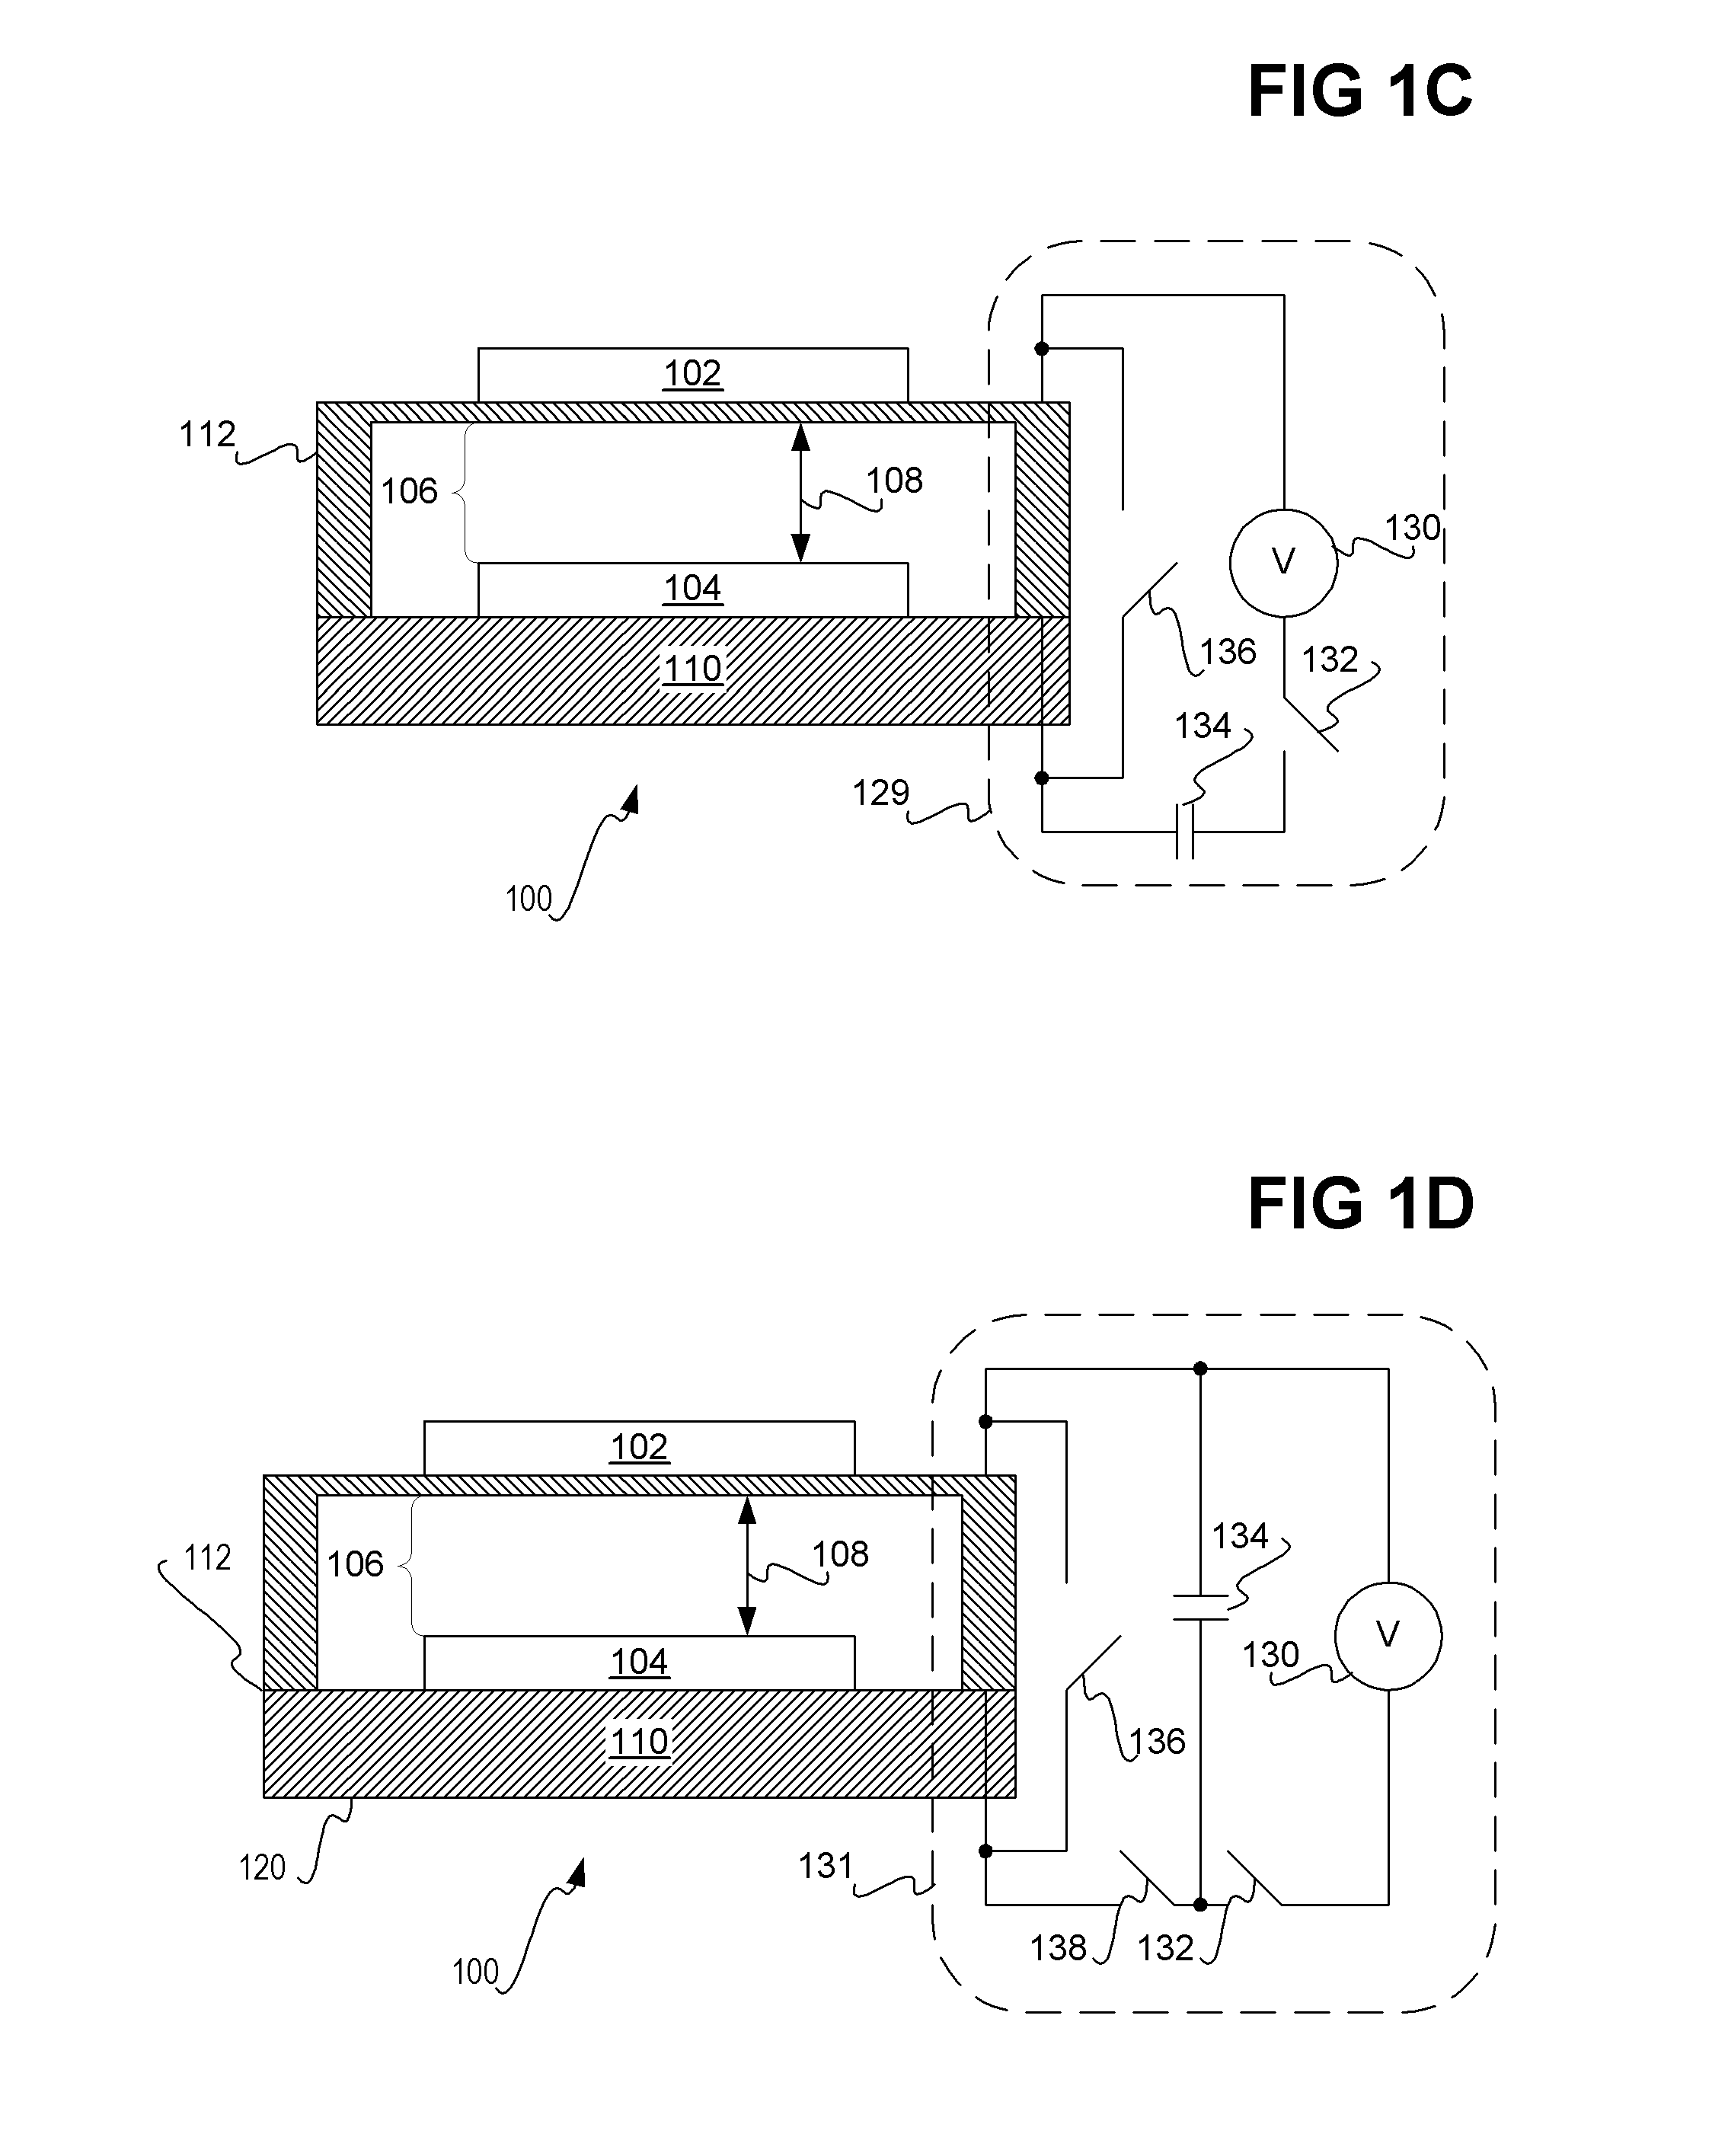 Self-packaged optical interference display device having anti-stiction bumps, integral micro-lens, and reflection-absorbing layers